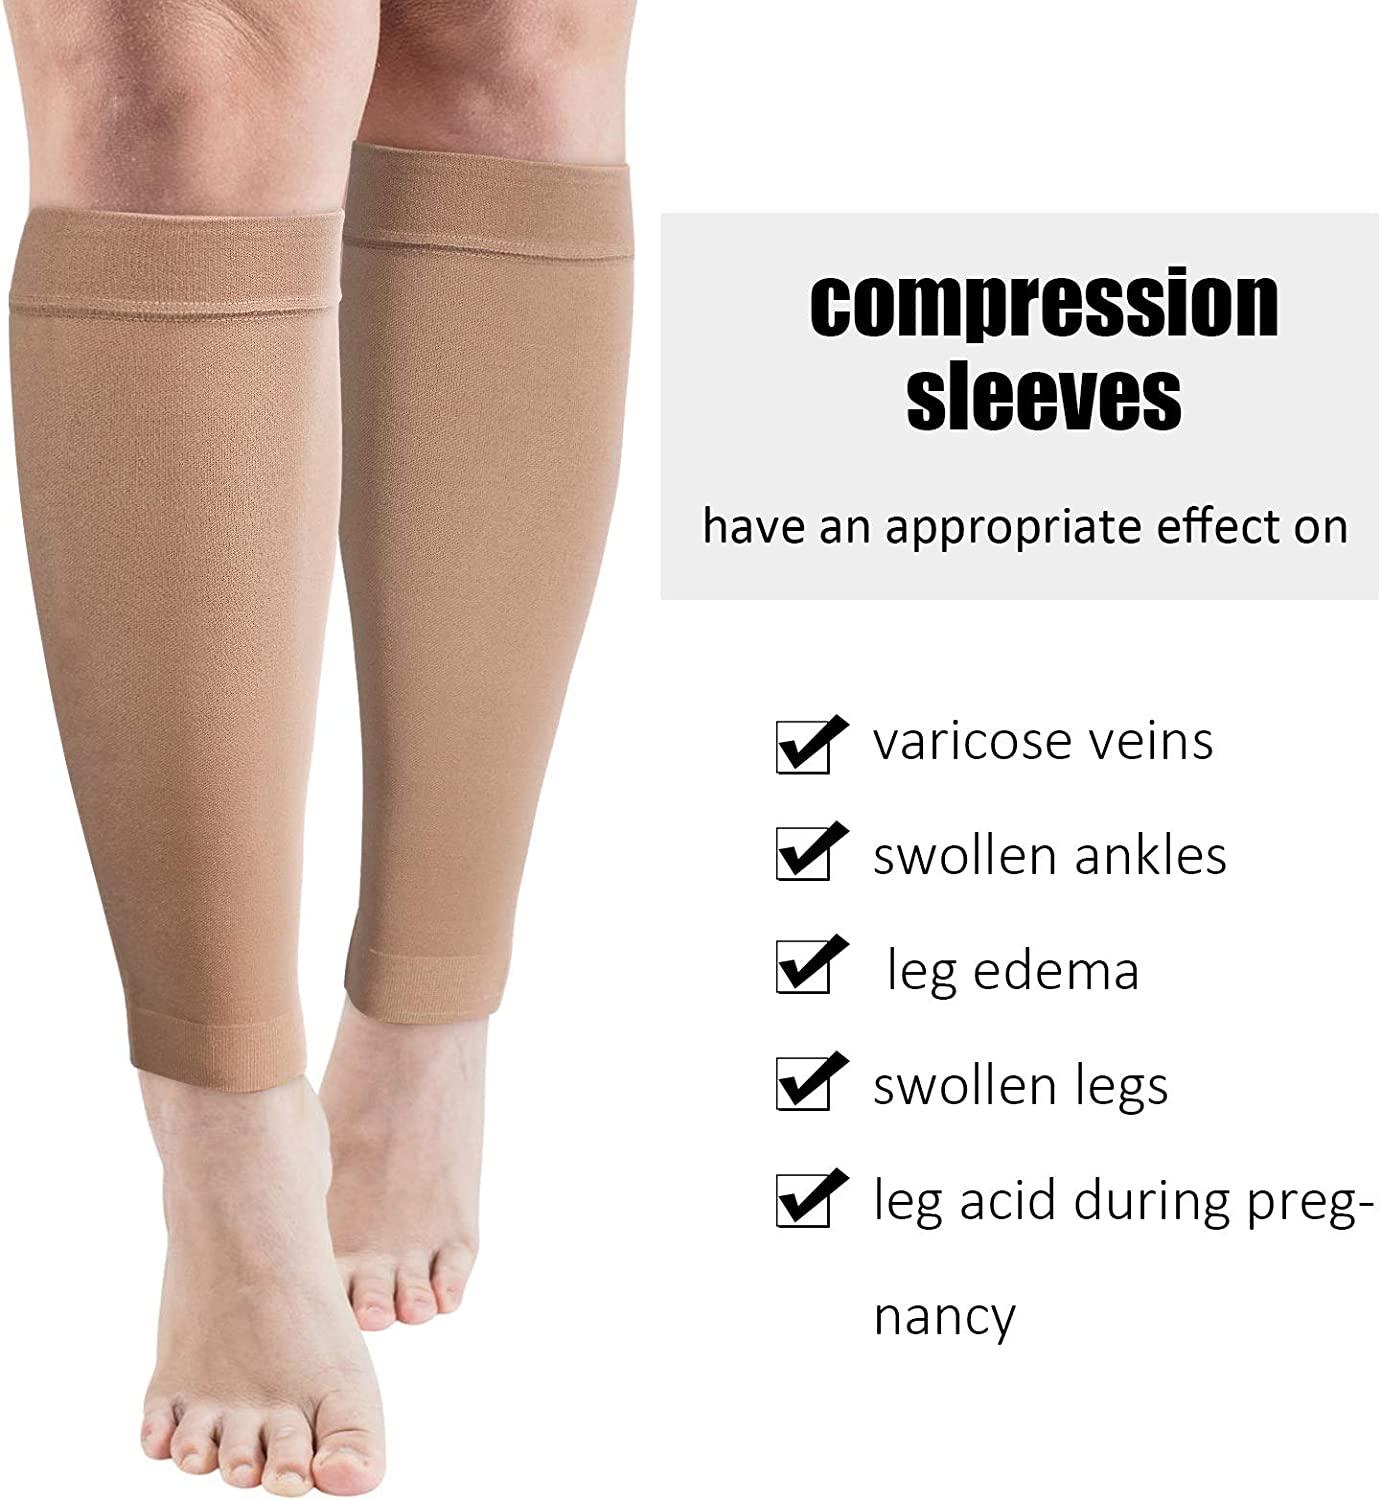 5XL Extra Wide Ankle and Grip Top - Full Leg Support for Spider Veins,  Lymphedema, and DVT Prevention with Full Calf and Thigh Plus Size - A609BL8